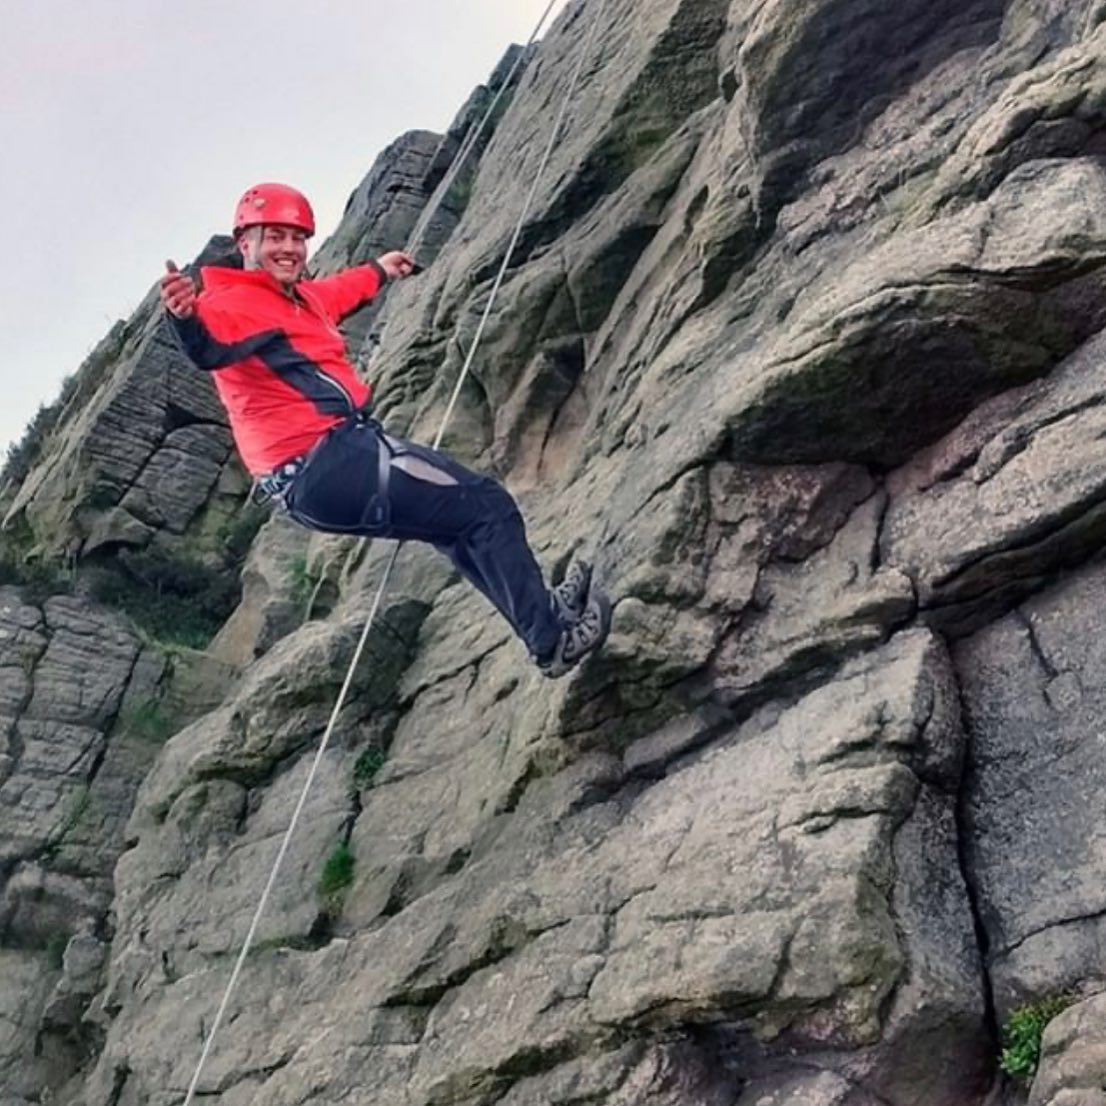 Our next climbing sessions at Windgather Rocks are:

• 30 June 10am - 1pm
• 3 July 2.30 - 5.30pm
• 18 July 10am - 1pm
• 4 Sep 10am - 1pm

Join our friendly, qualified instructor for these session, where you'll learn the basics of ropework, before climbing under their supervision to the Peak District's eighth highest point. Then you'll need to be brave and challenge yourself to abseil back down (or walk down the path instead if you prefer!). Suitable for all from 10+, we hope to see you here.

More info and booking at www.wilderness-development.com, link in our bio 🧗‍♀️⛰🧗‍♀️
.
.
.
#wildernessdevelopment #smallbusiness #rockclimbing #climbing #scrambling #abseiling #trysomethingnew #peakdistrict #peakdistrictnationalpark #peakdistrictclimbing #mountainsfellsandhikes #roamtheuk #outdoorpursuits #outdooradventures #outdooractivities #nationalparksuk #booknow